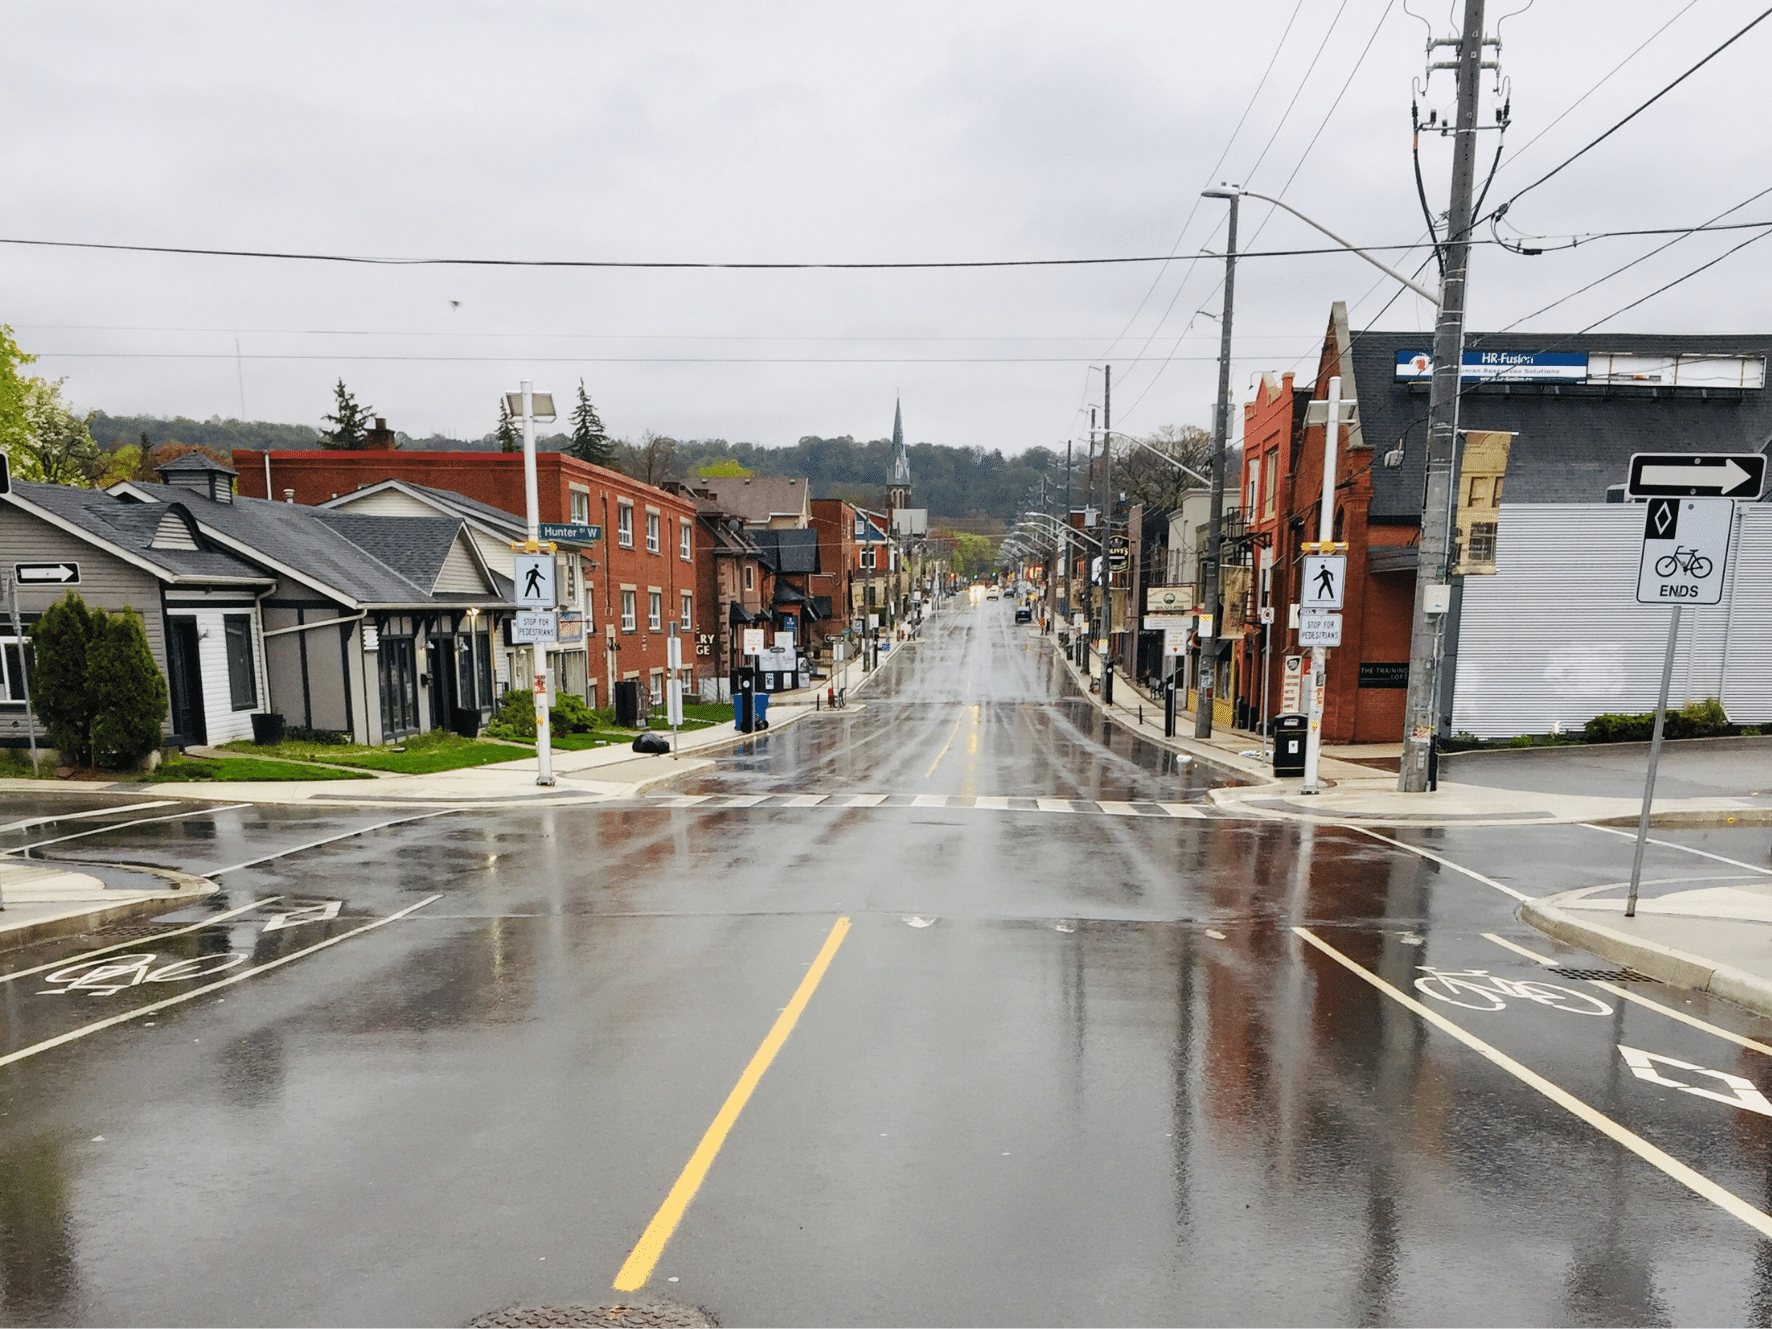 Photo of an empty street in the rain. There are two lanes of motor vehicle traffic, painted bike lanes and sidewalks